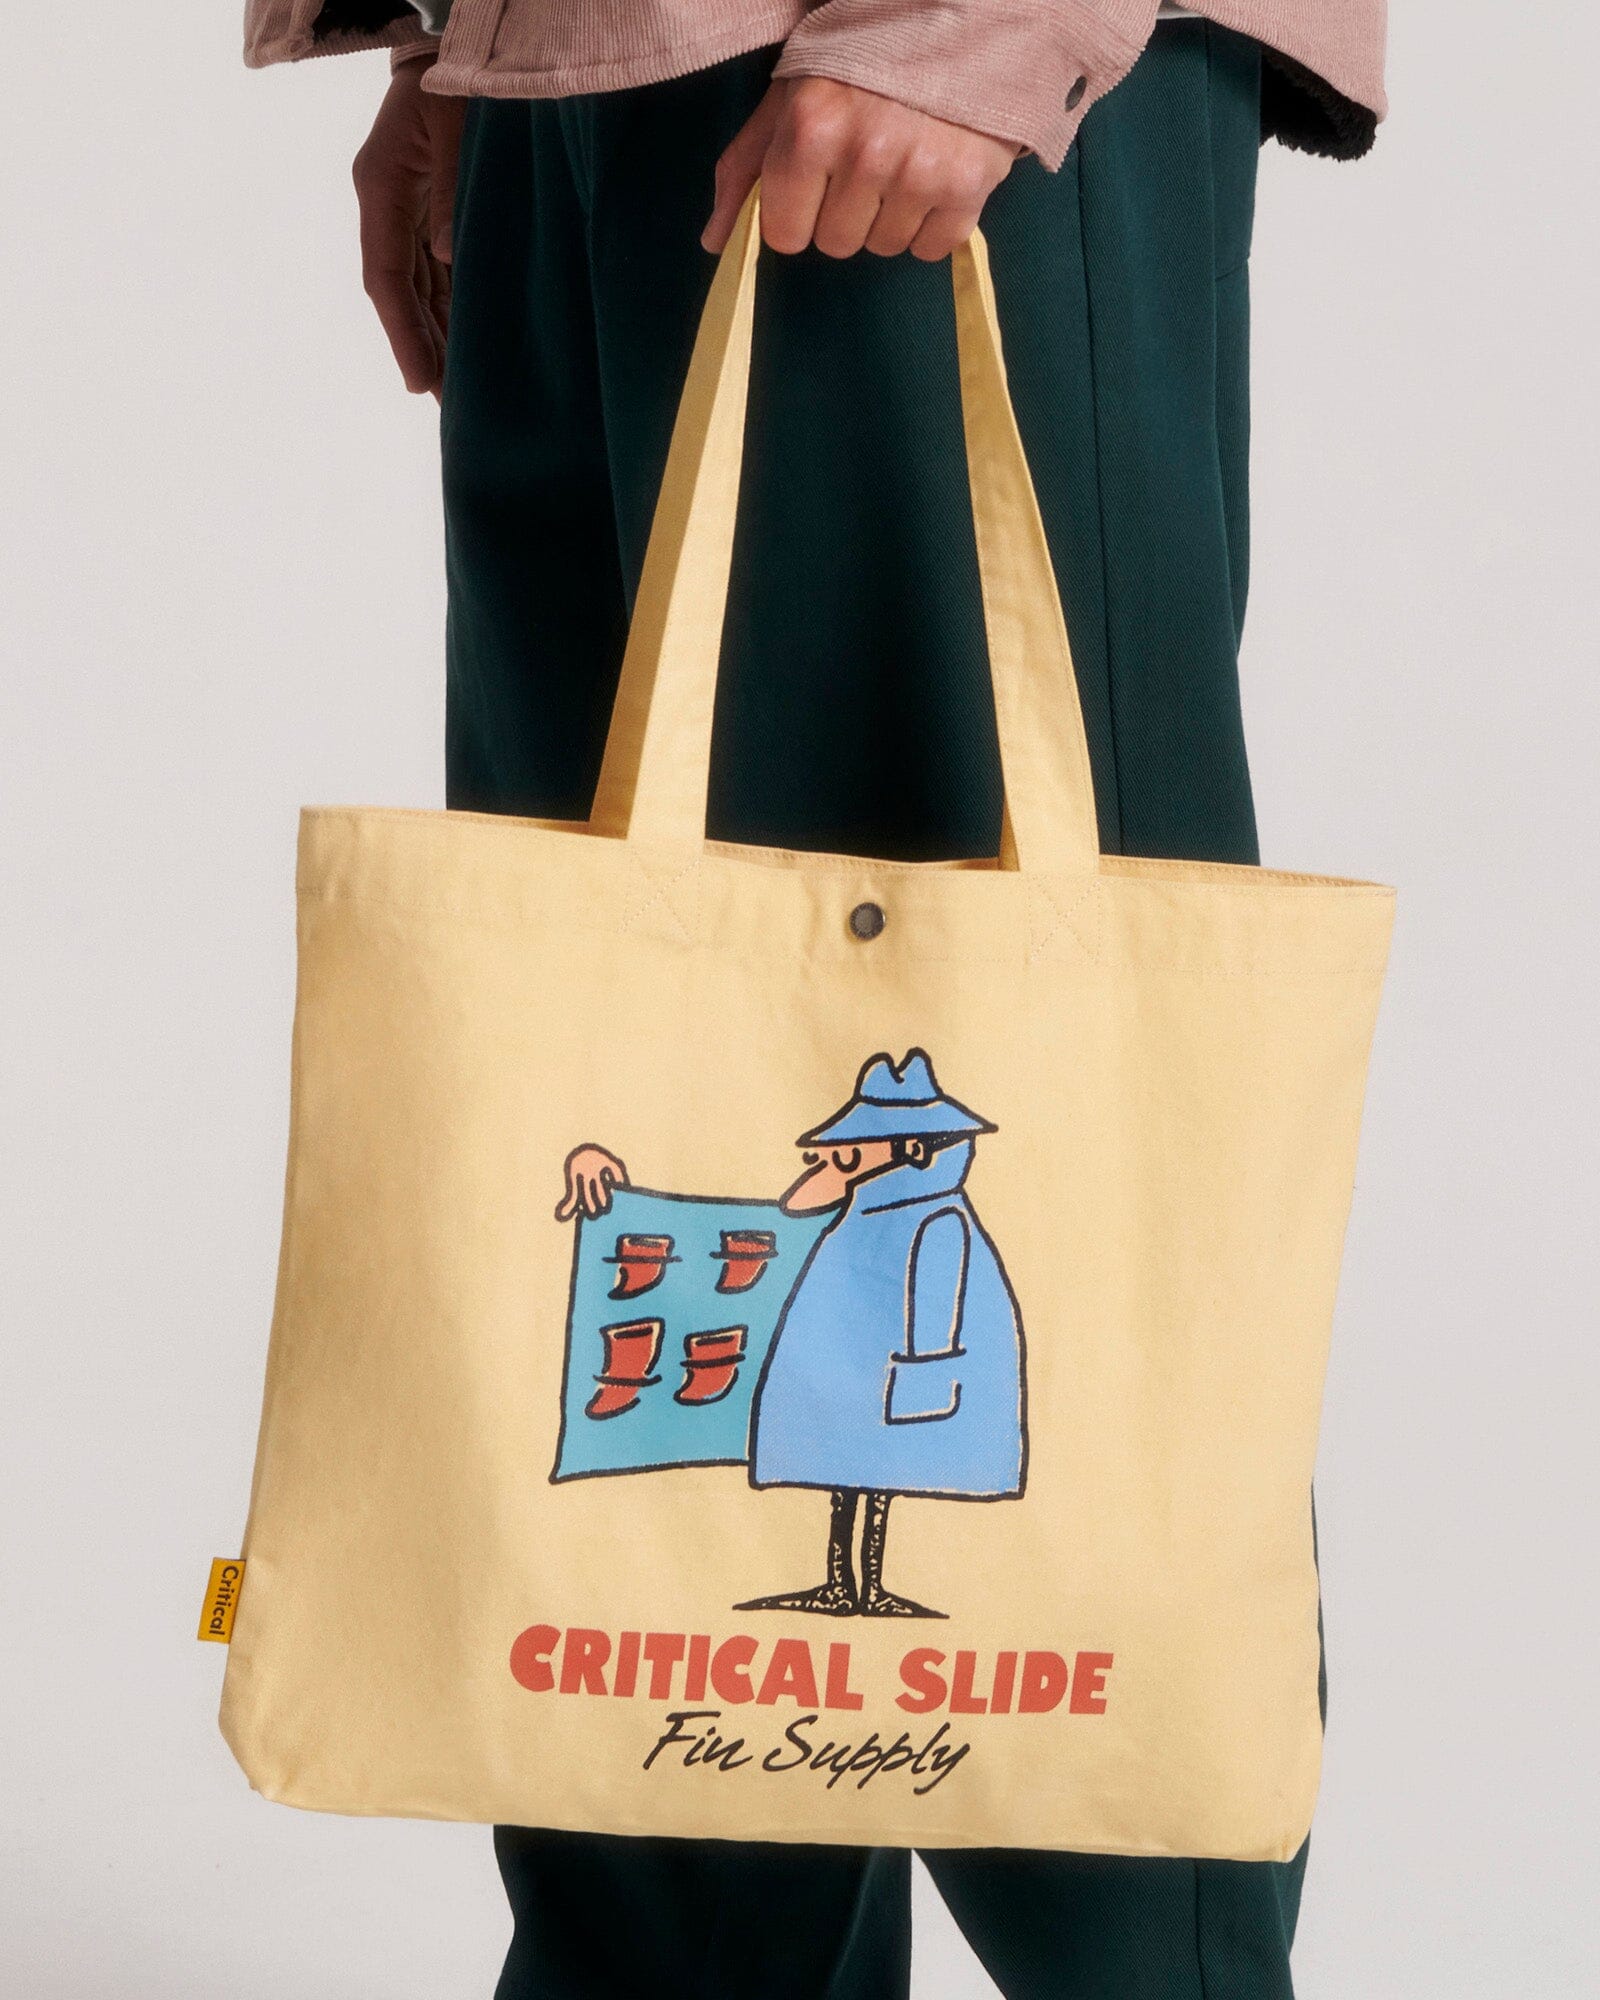 CRITICAL SLIDE Supply Tote Sand Tote Bags The Critical Slide Society 